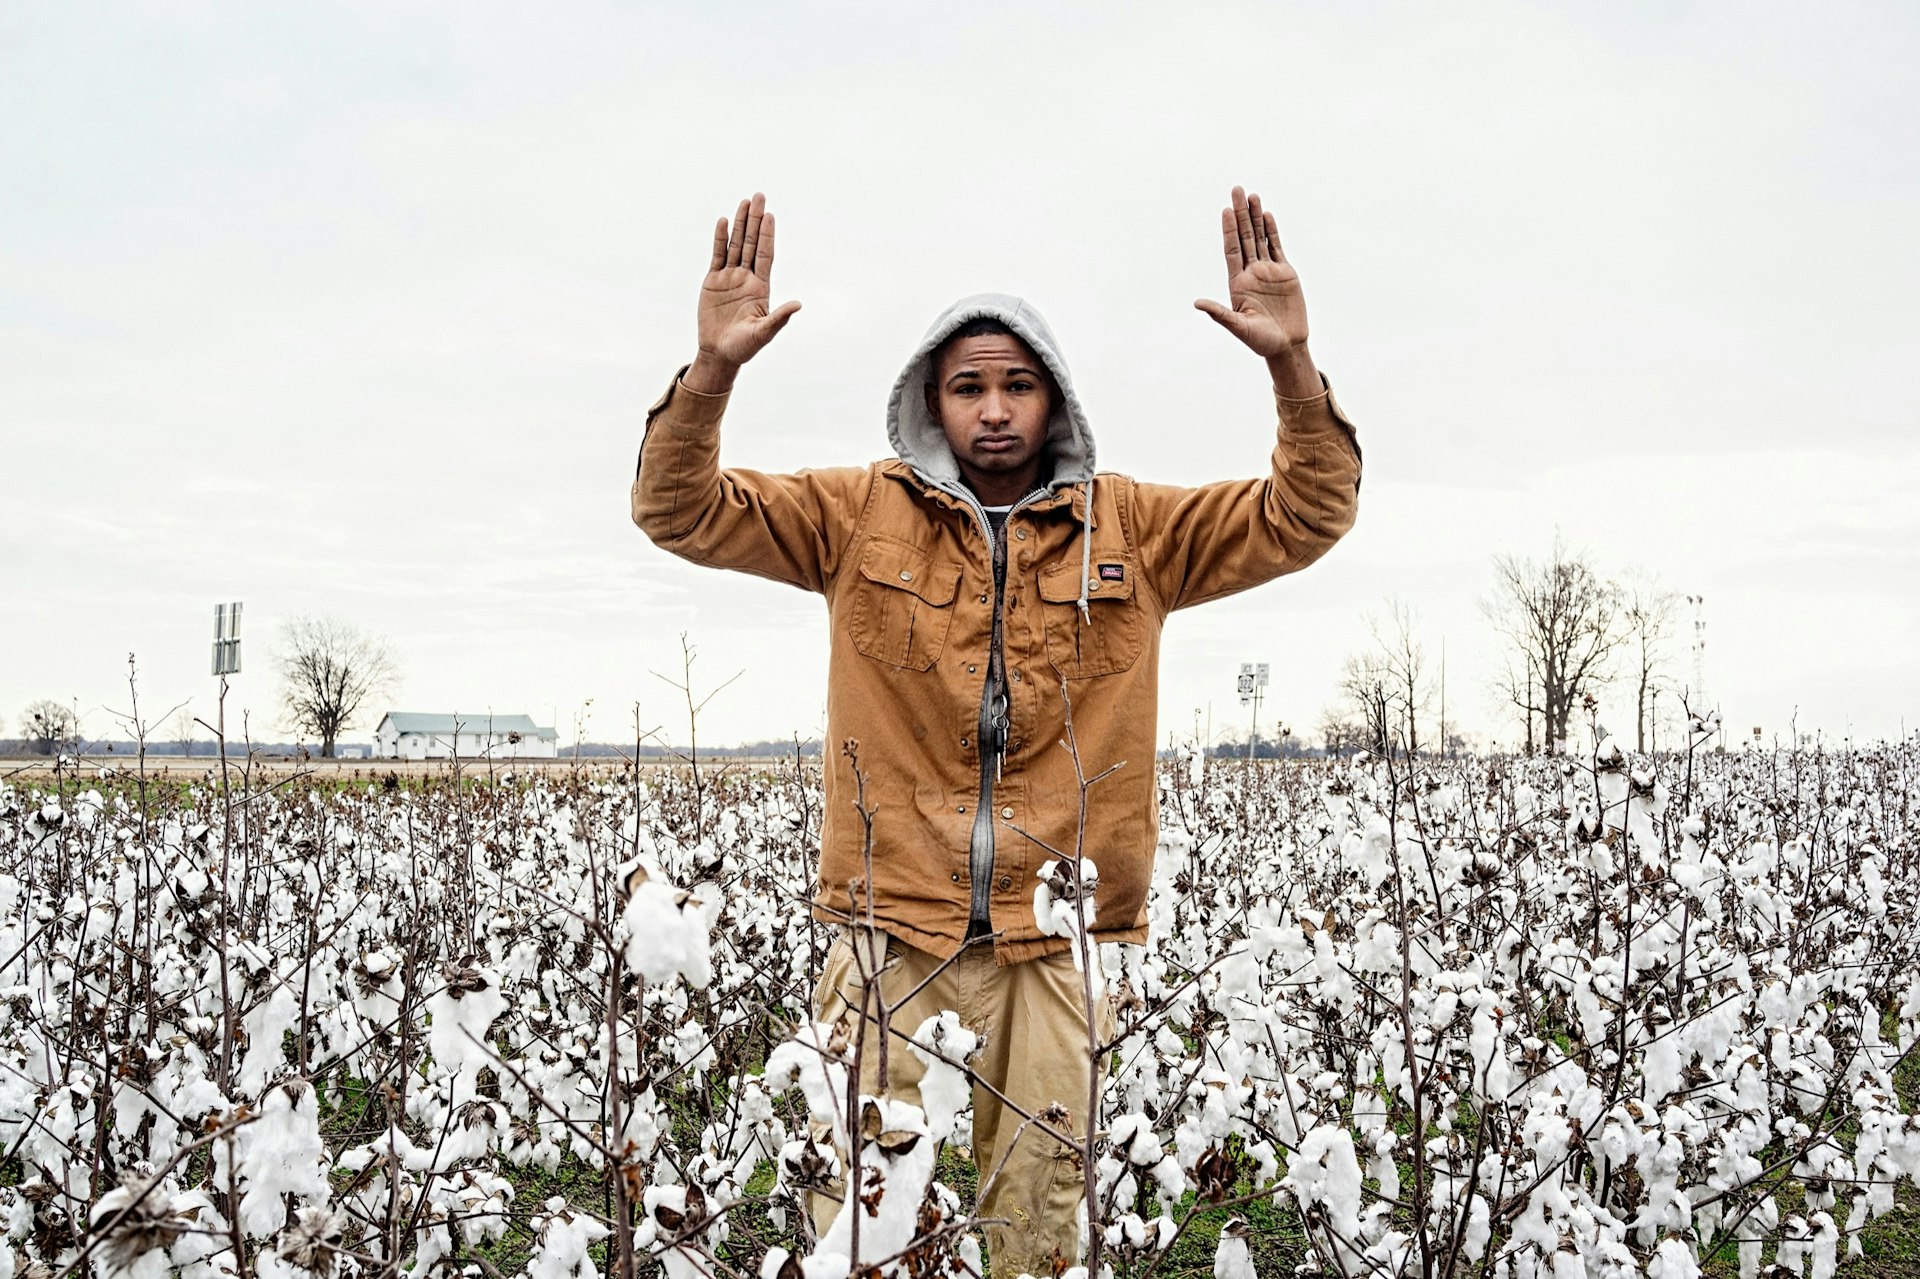 What it means to document the everyday reality of black America